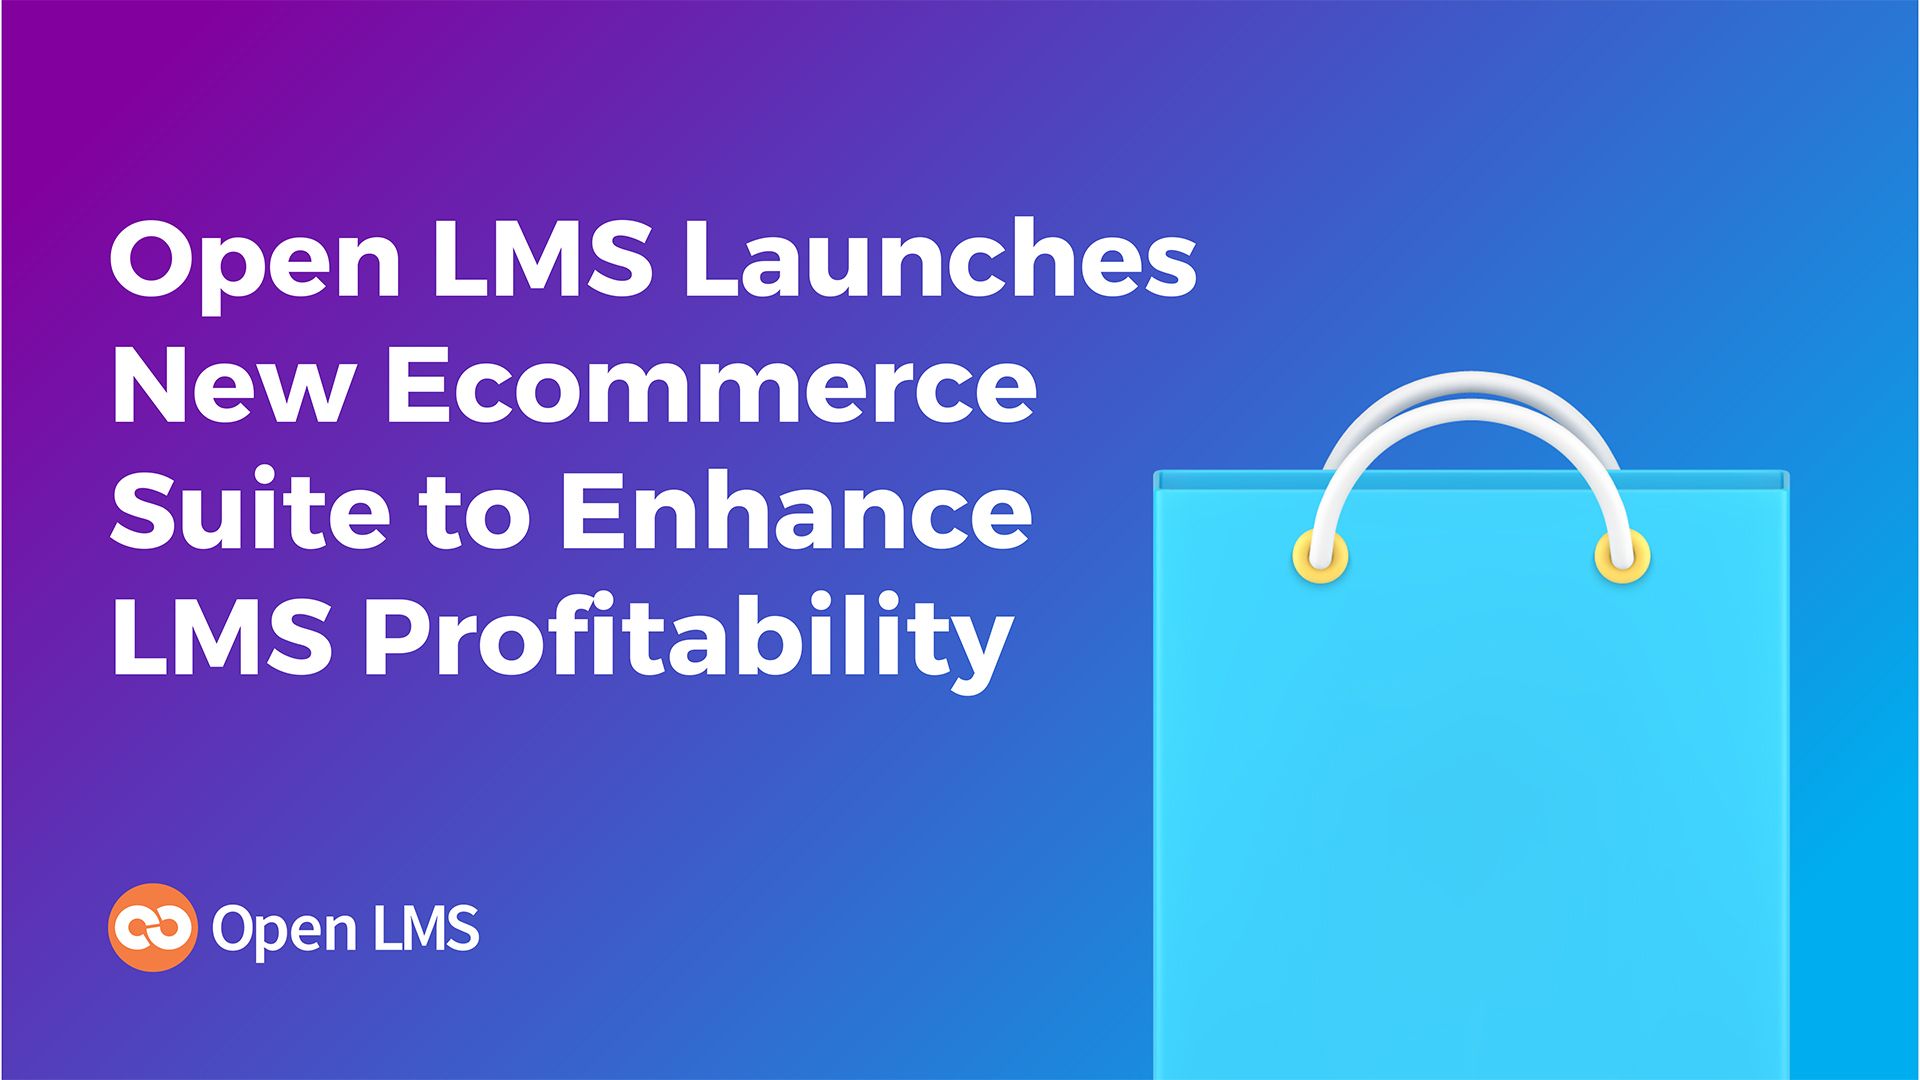 Open LMS Launches New Ecommerce Suite to Enhance LMS Profitability